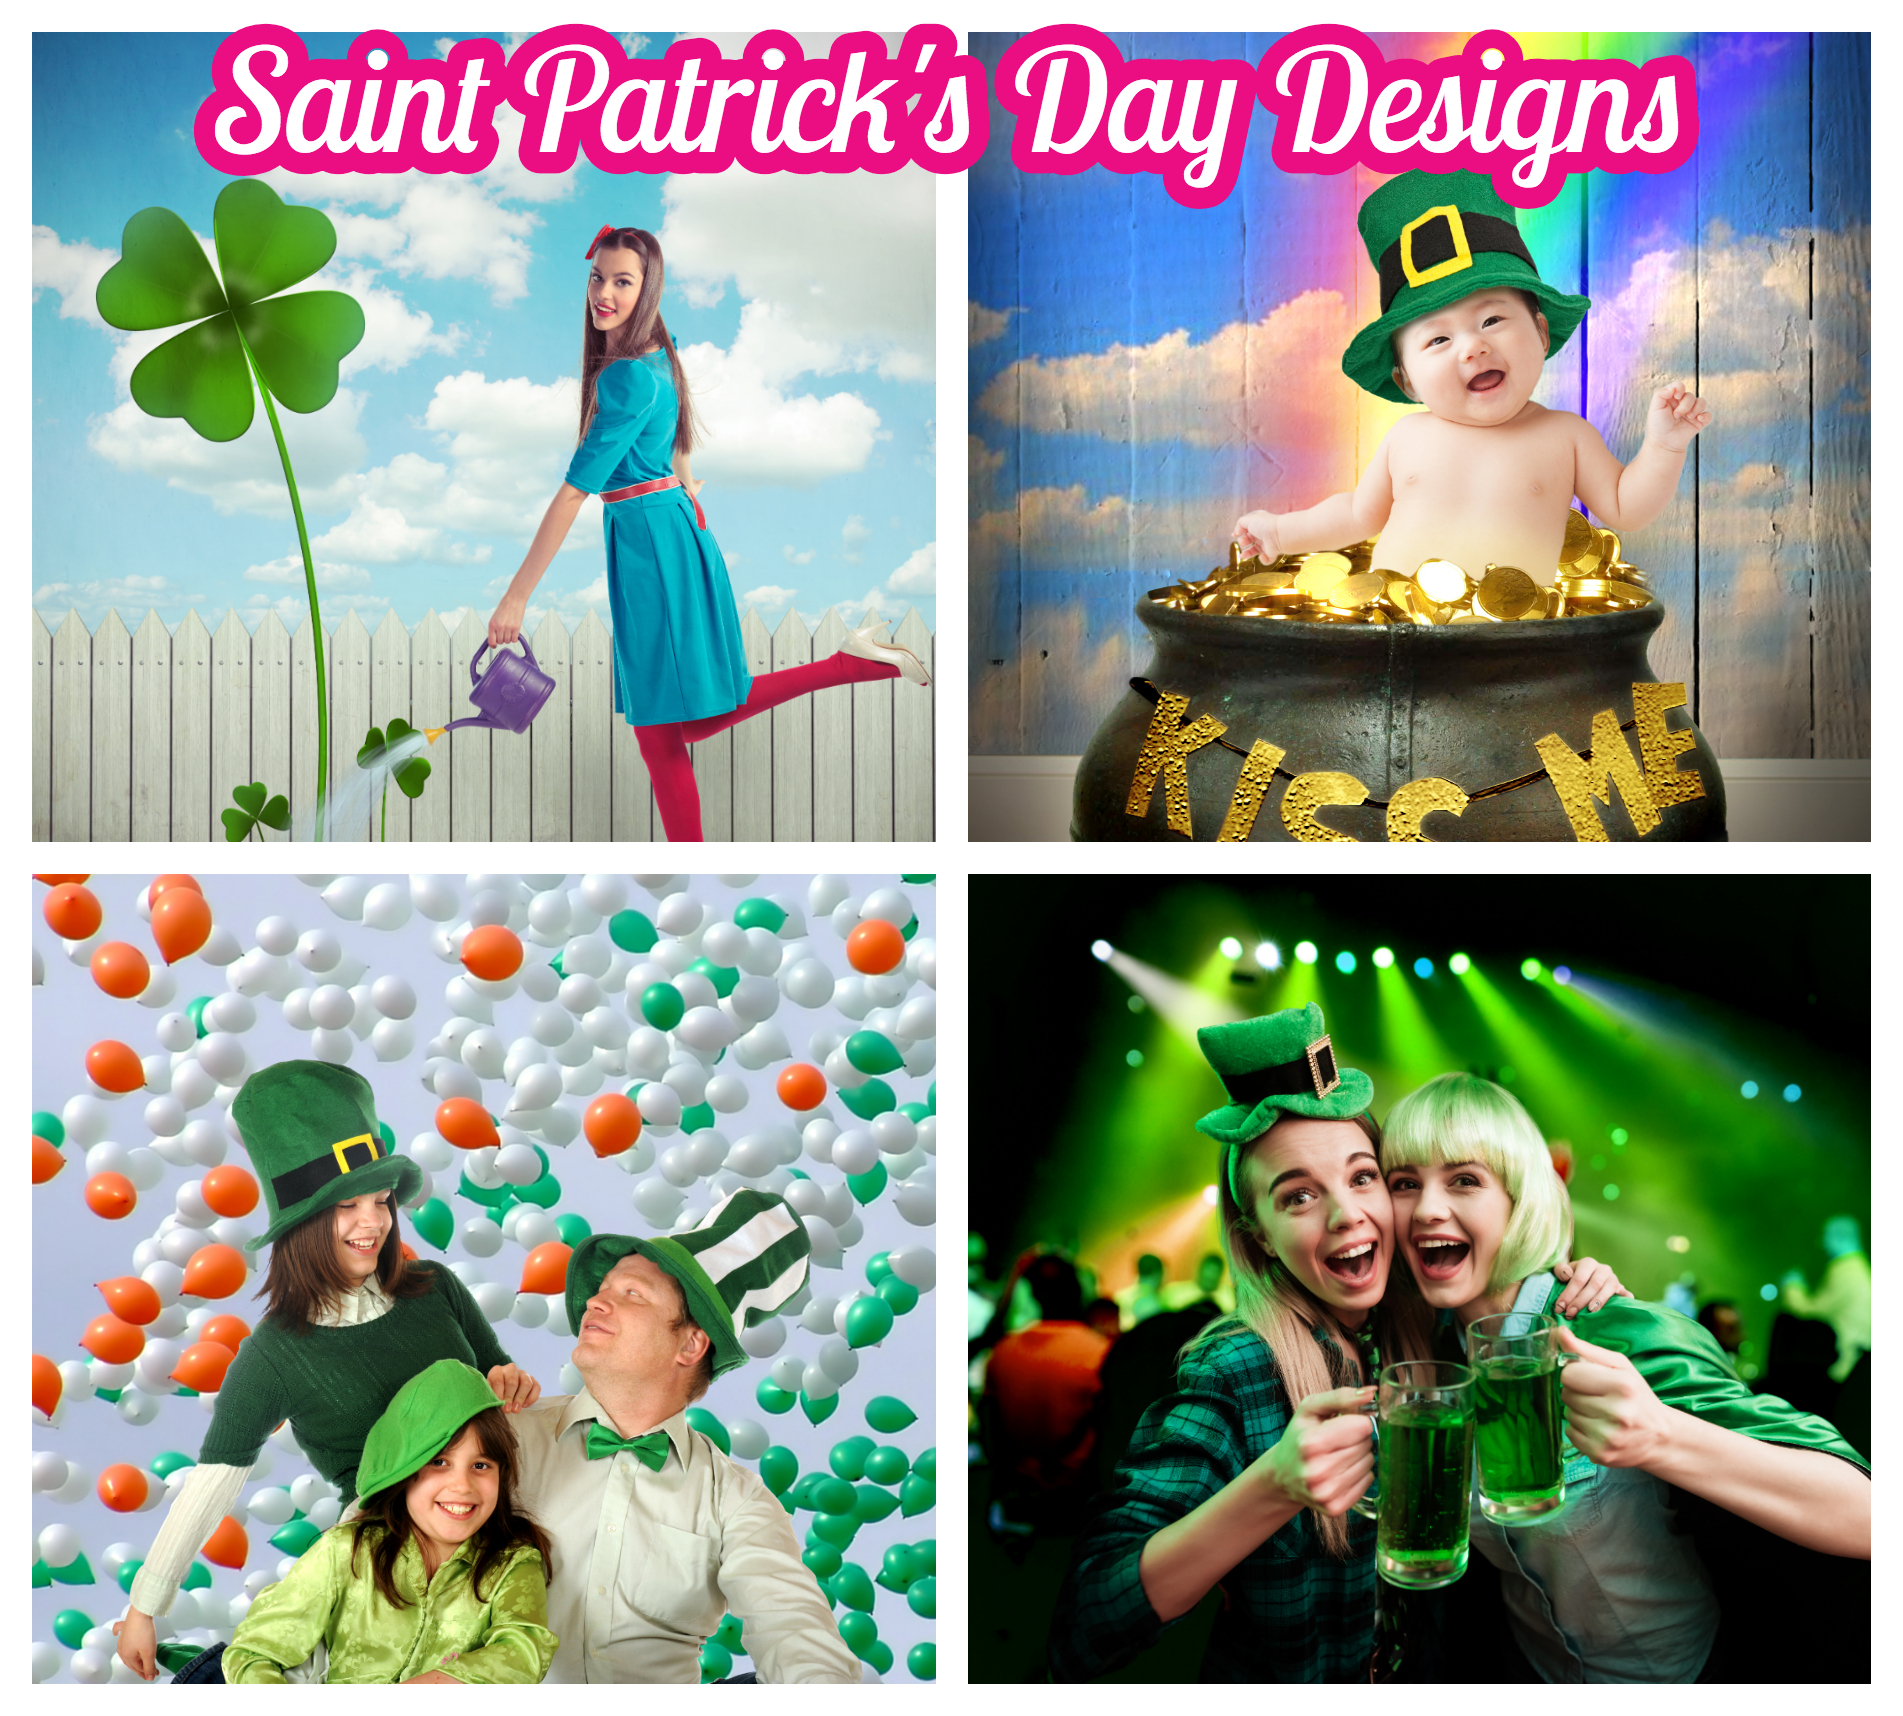 Grid of four St. Patrick's themed images and text saying "St Patricks Day Designs"